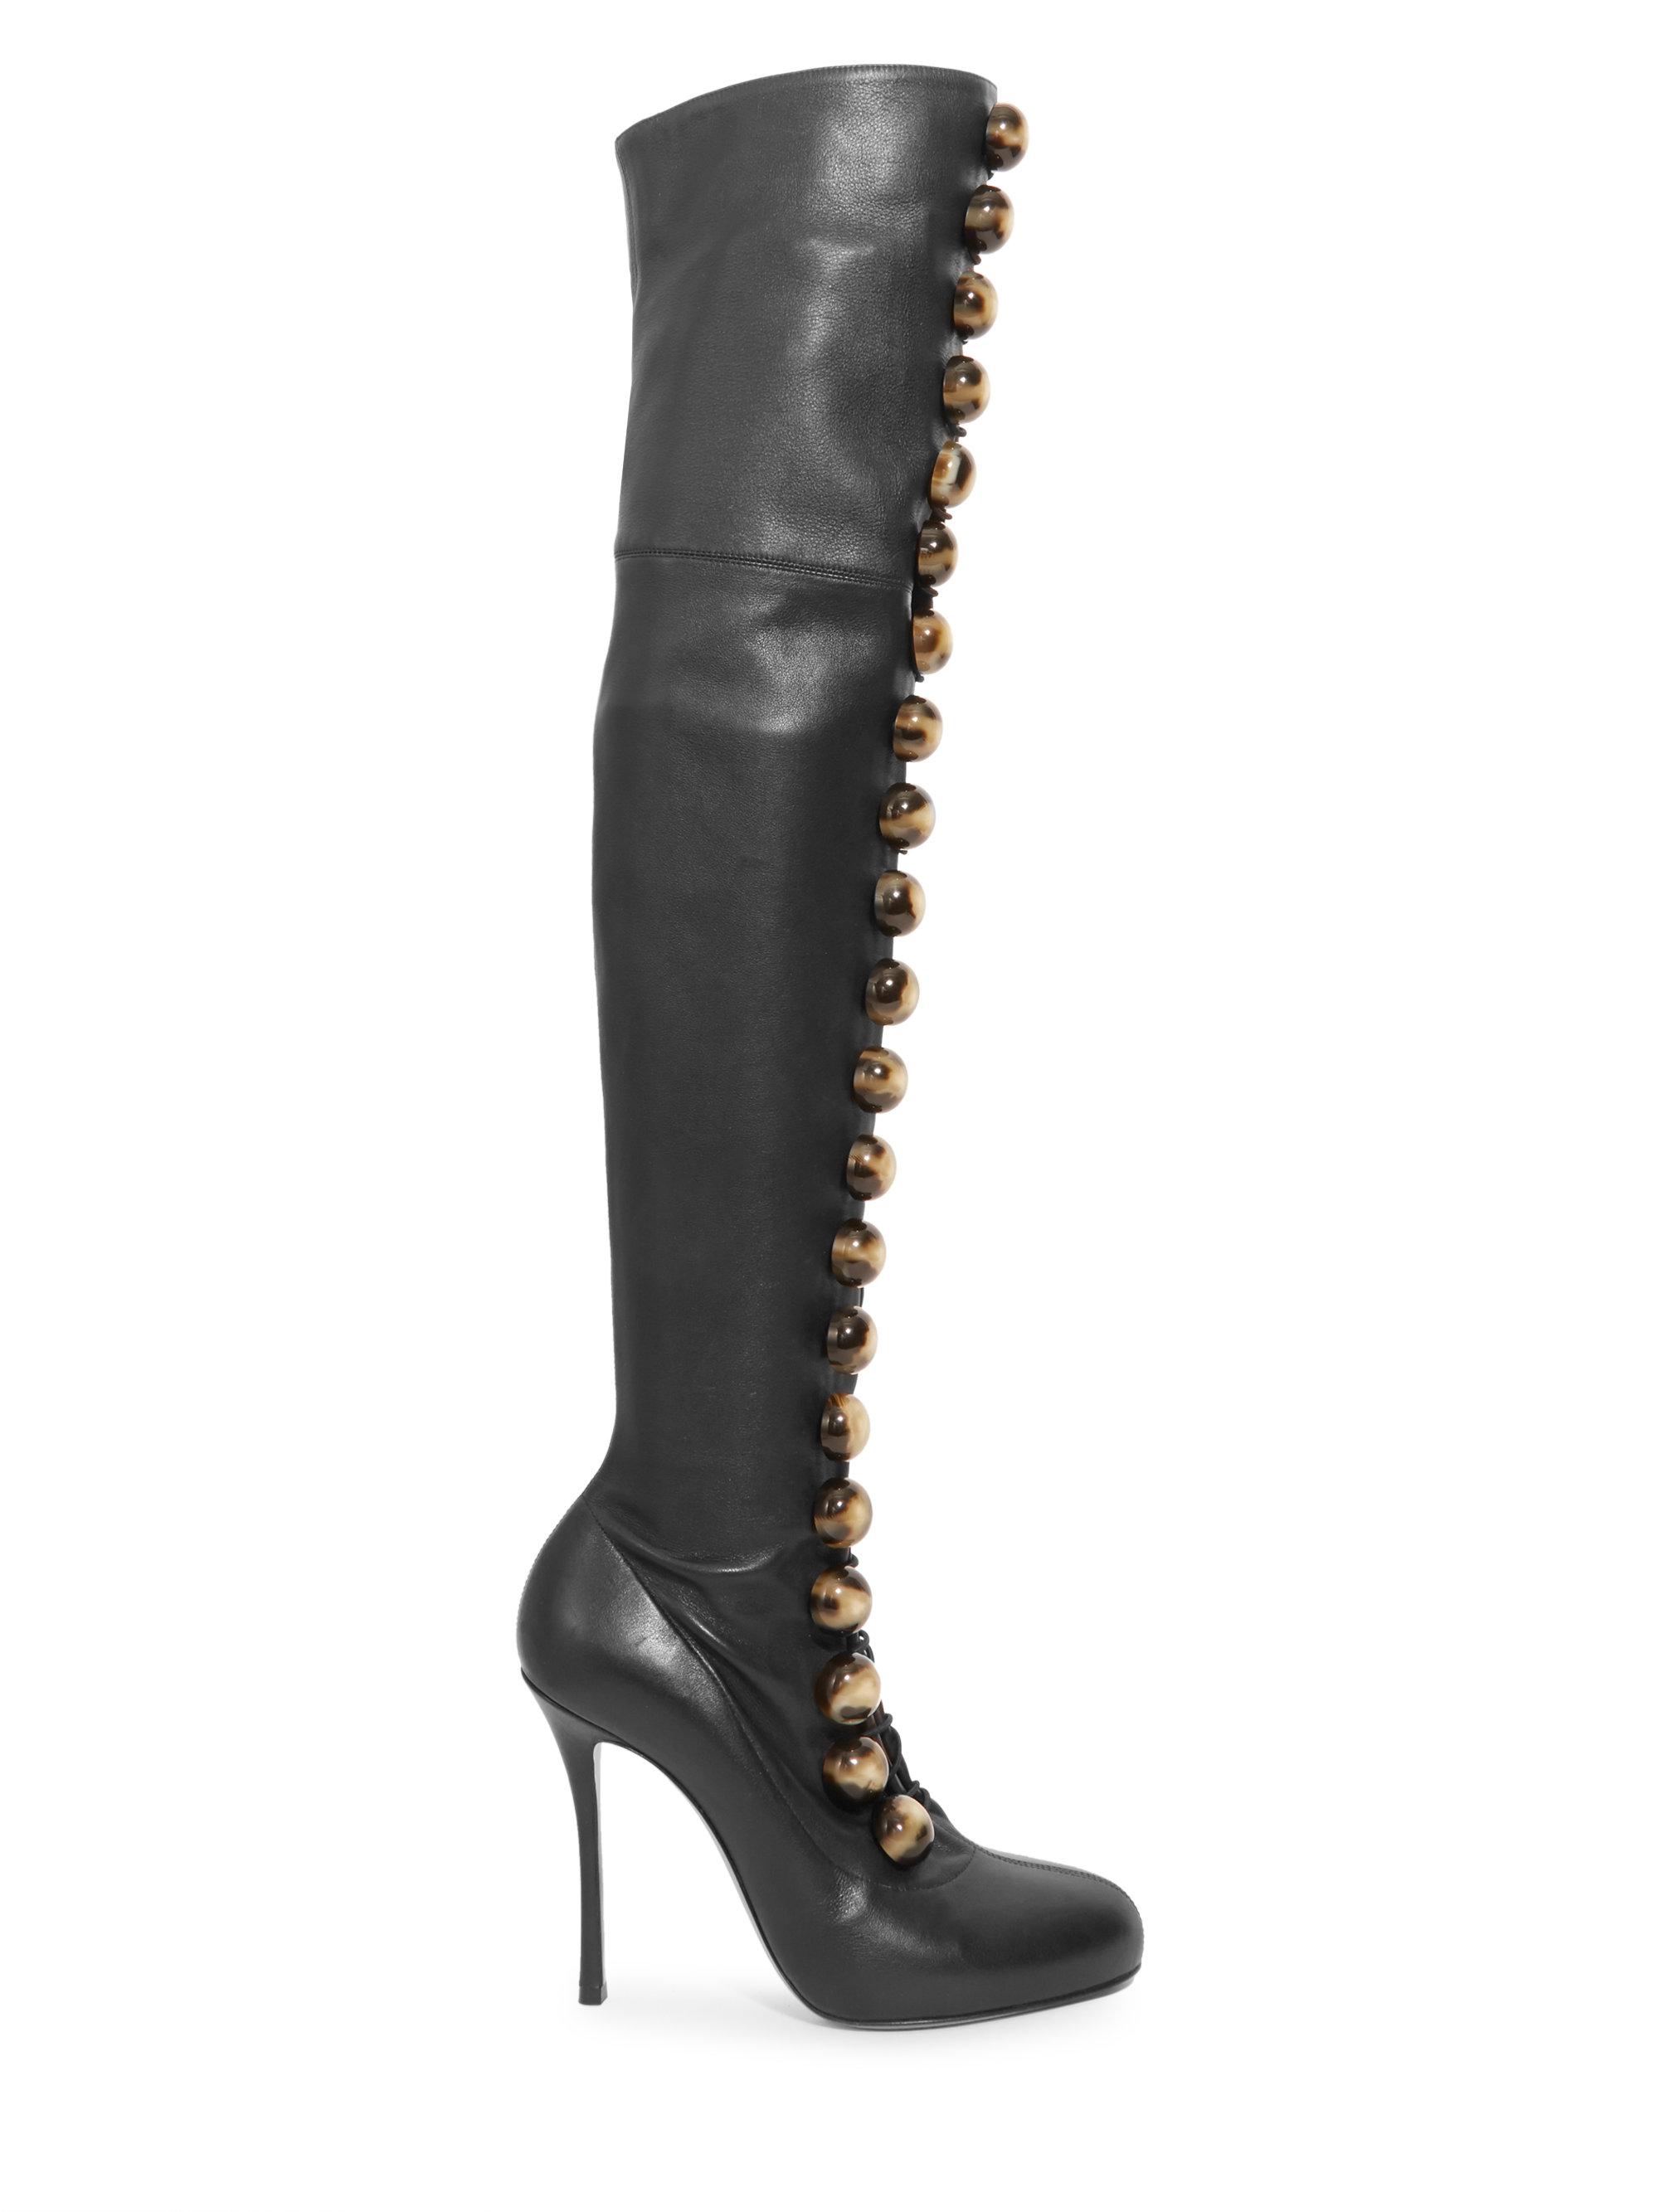 Christian Louboutin Fabiola 100 Leather Thigh High Boots In Black Lyst